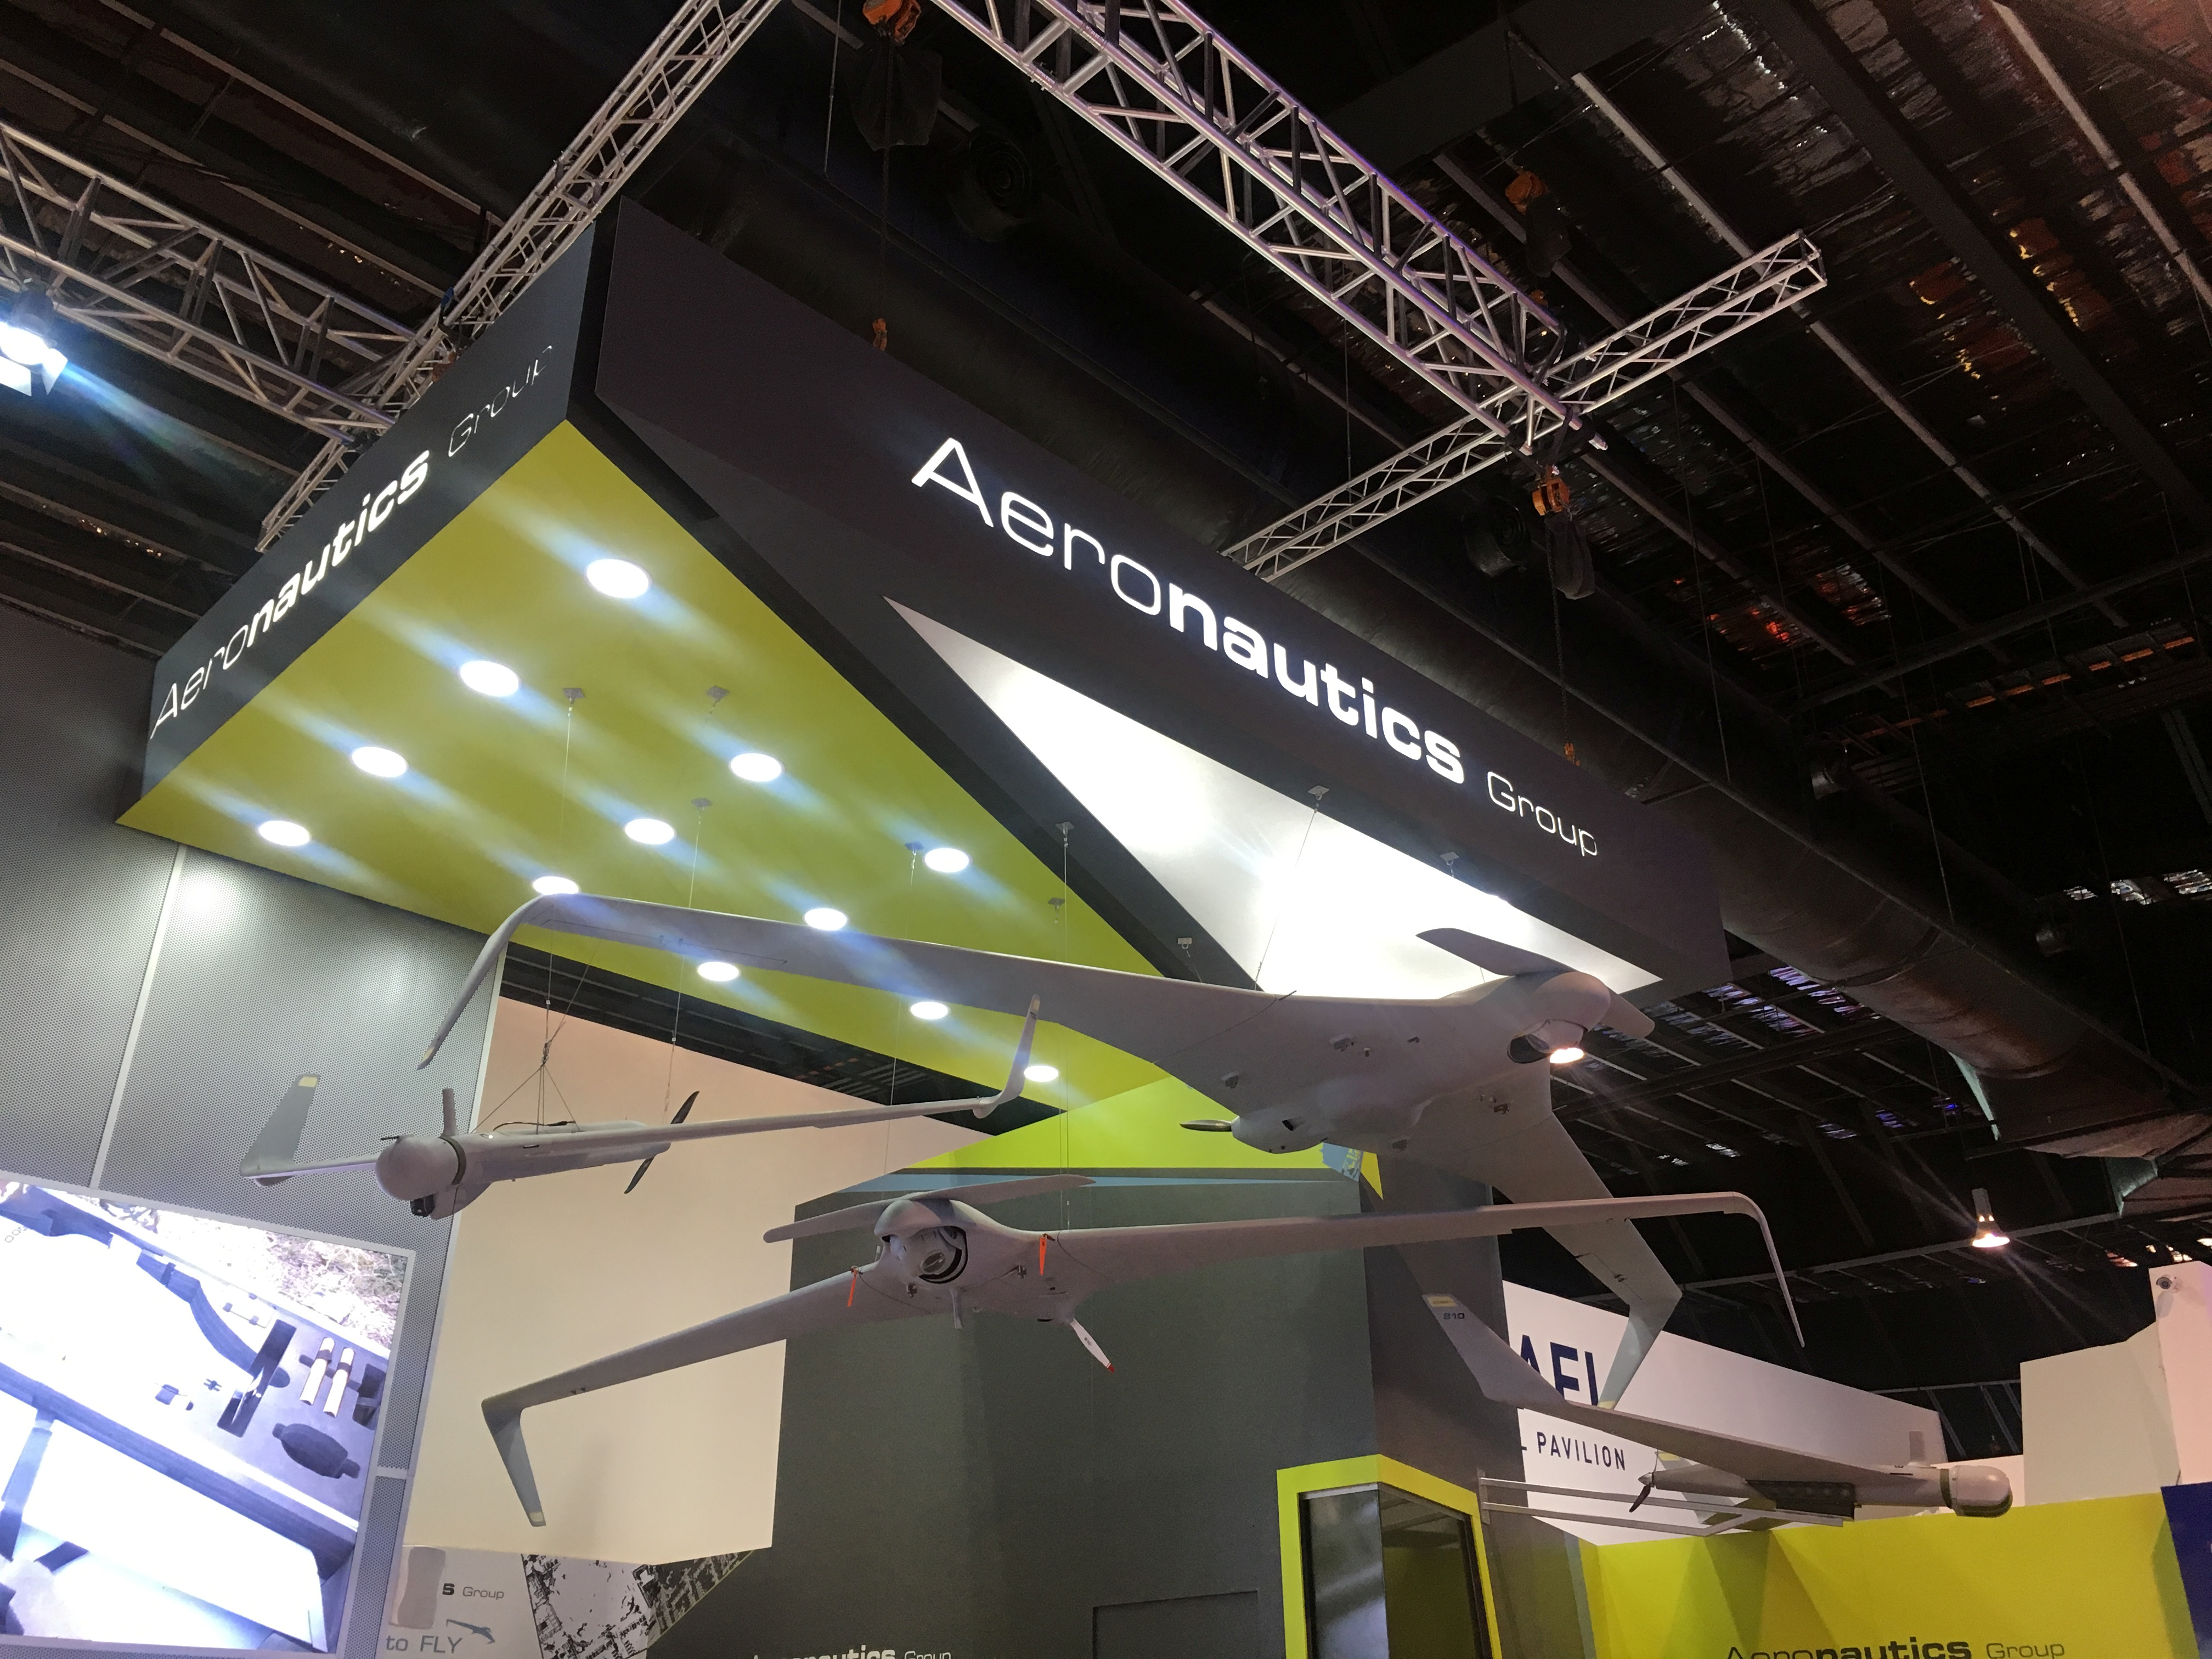 A drone model is seen on display at Israel Aerospace Industries' booth at the Singapore Airshow